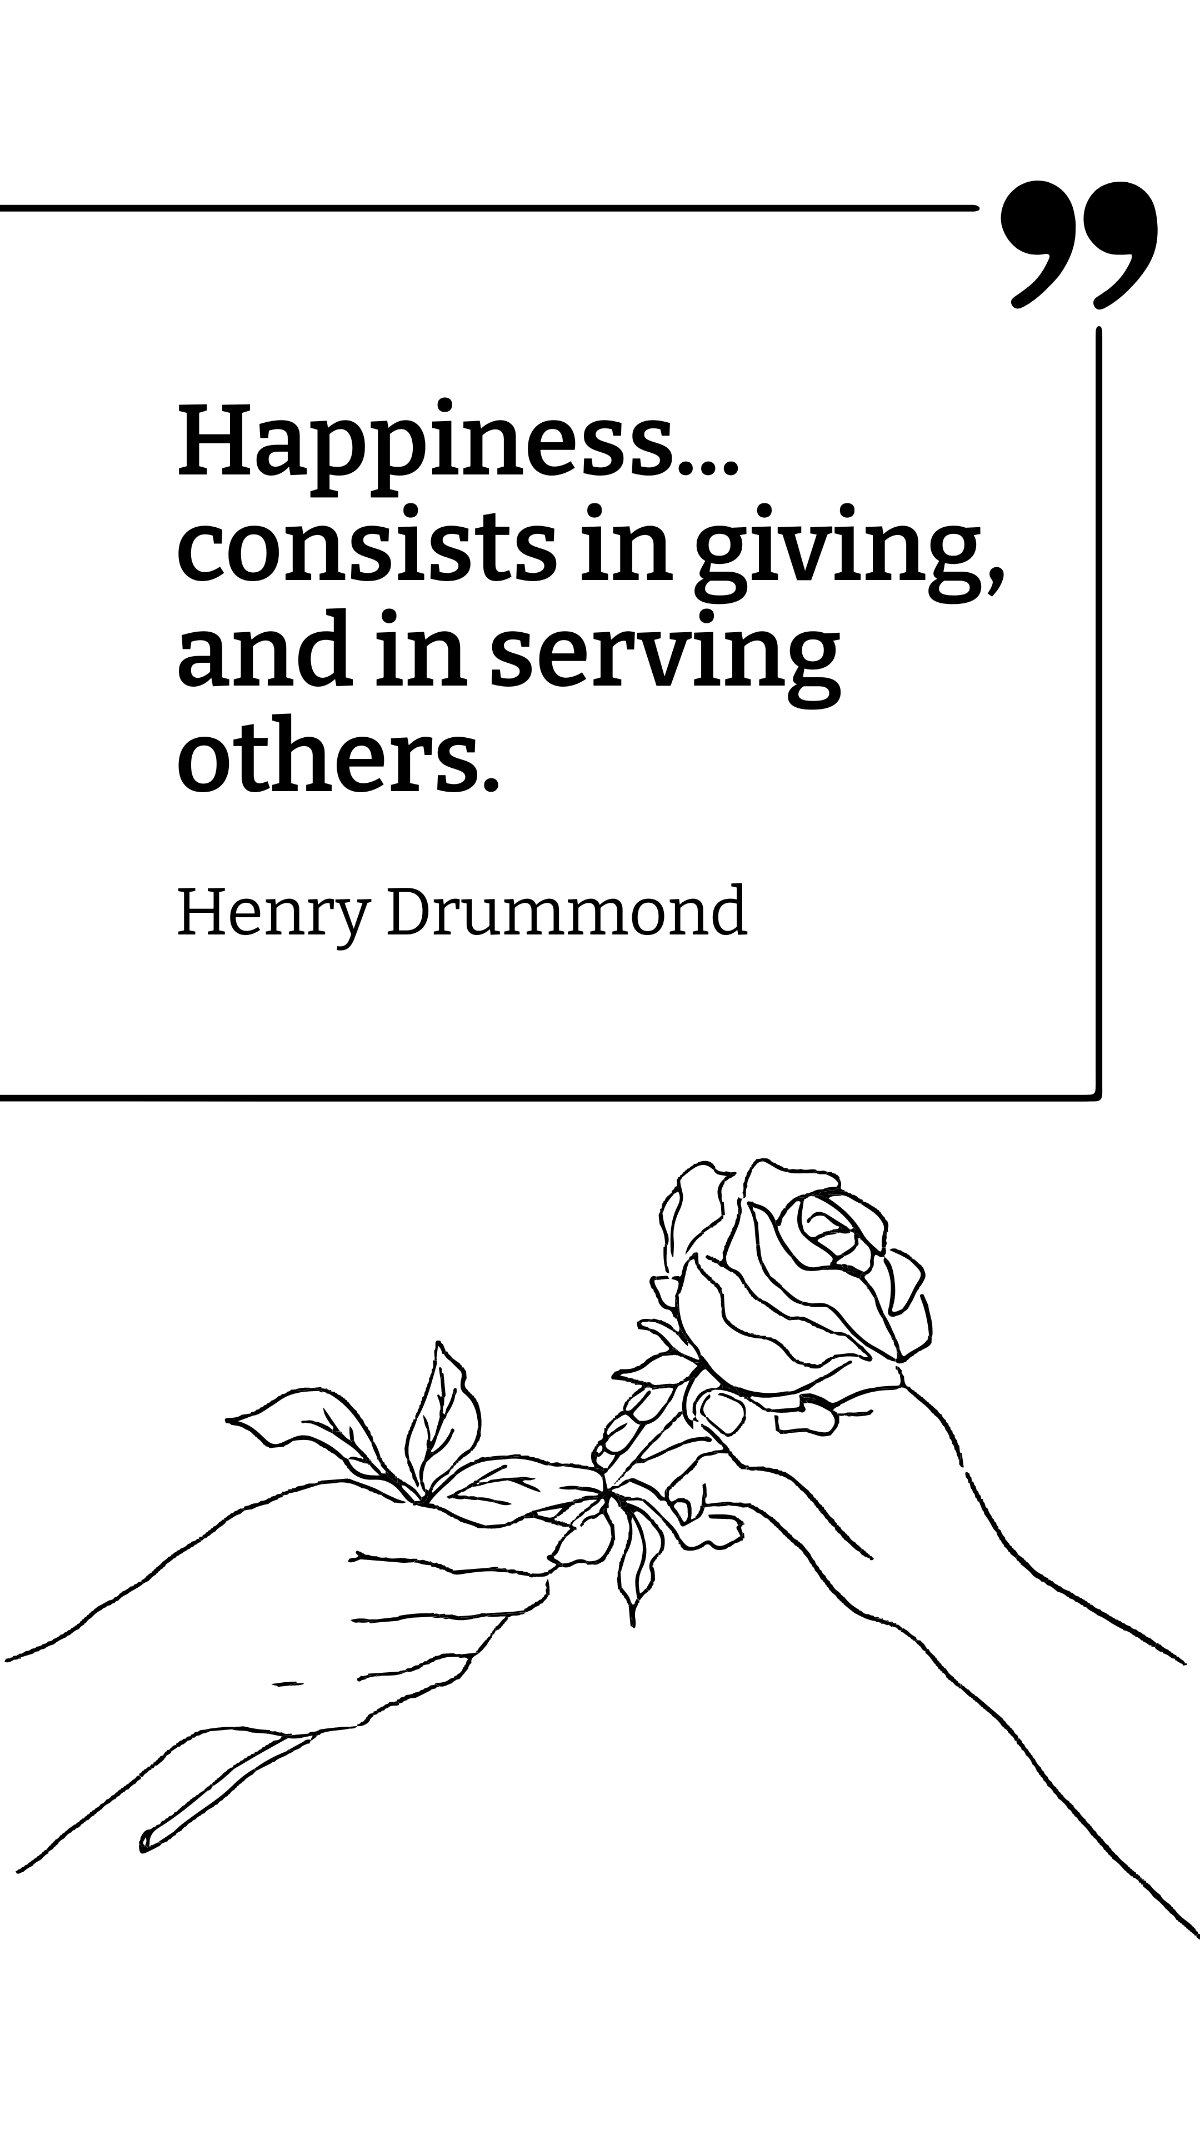 Henry Drummond - Happiness... consists in giving, and in serving others. Template